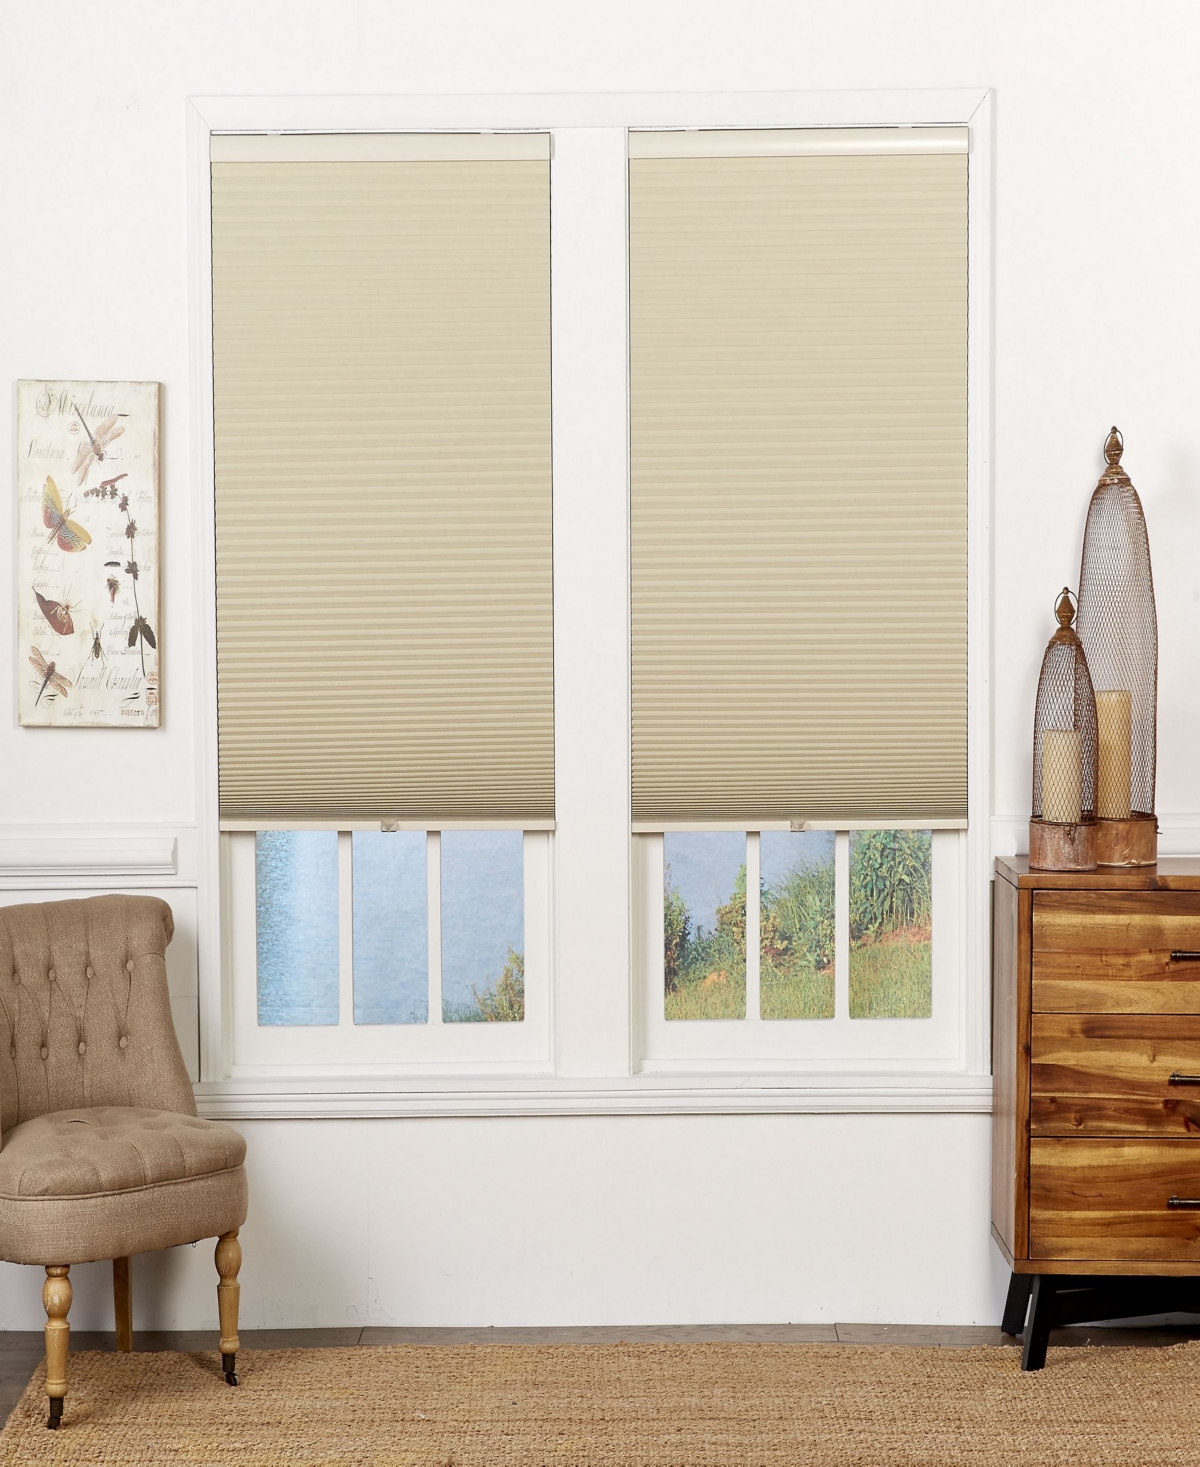 The Cordless Collection Cordless Blackout Cellular Shade, 46.5x72 In Latte-whit